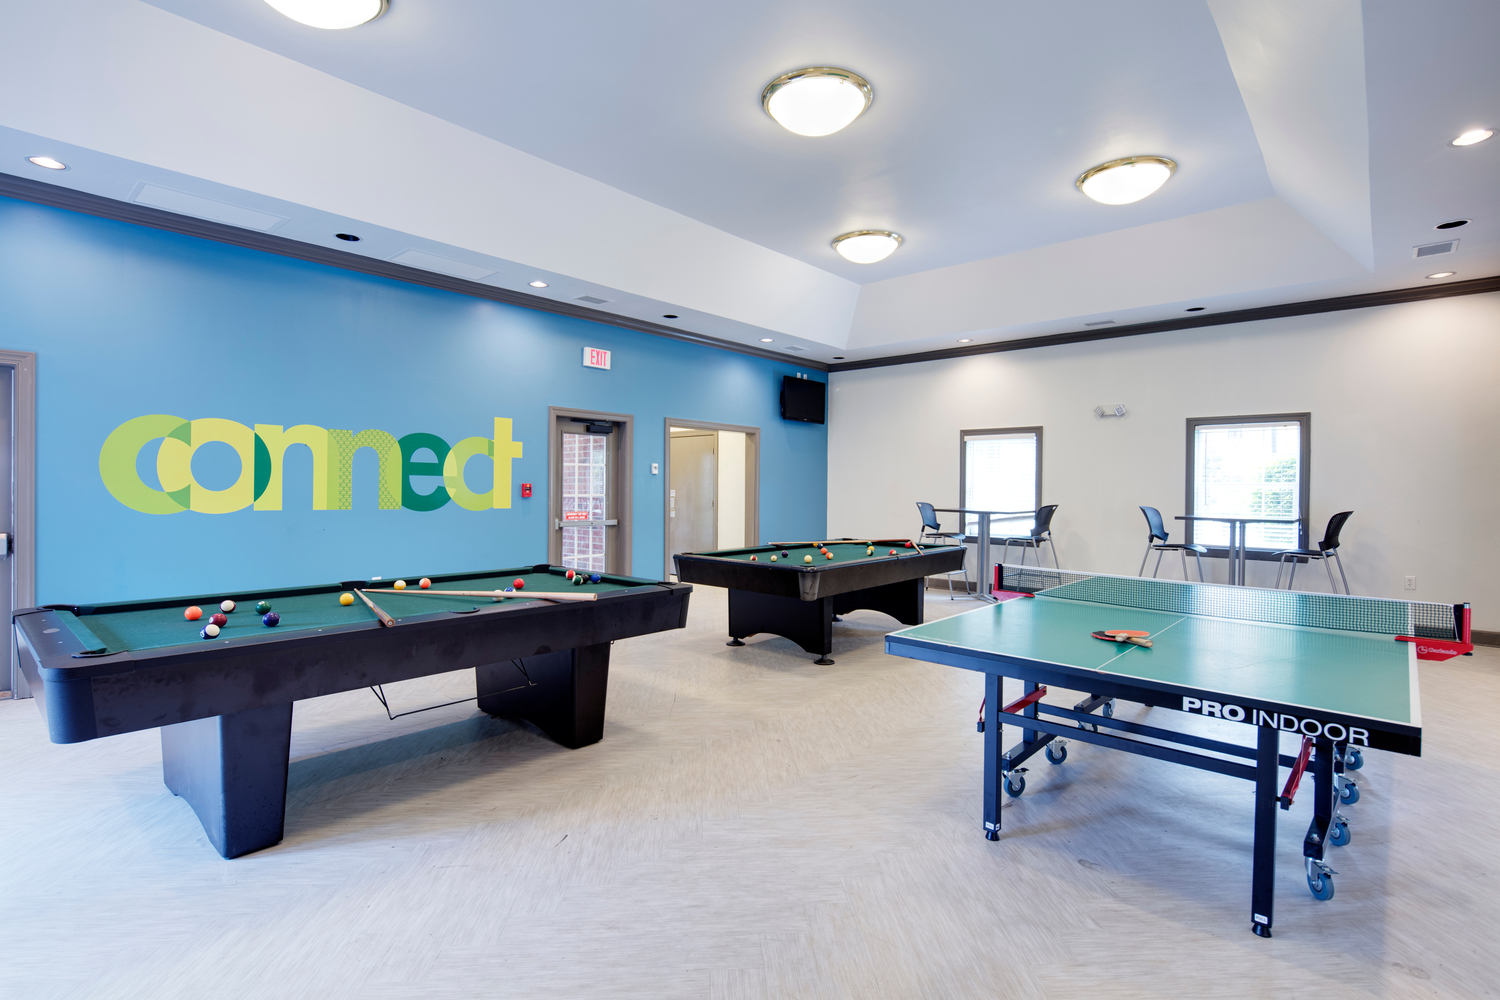 Game room with pool and ping pong tables